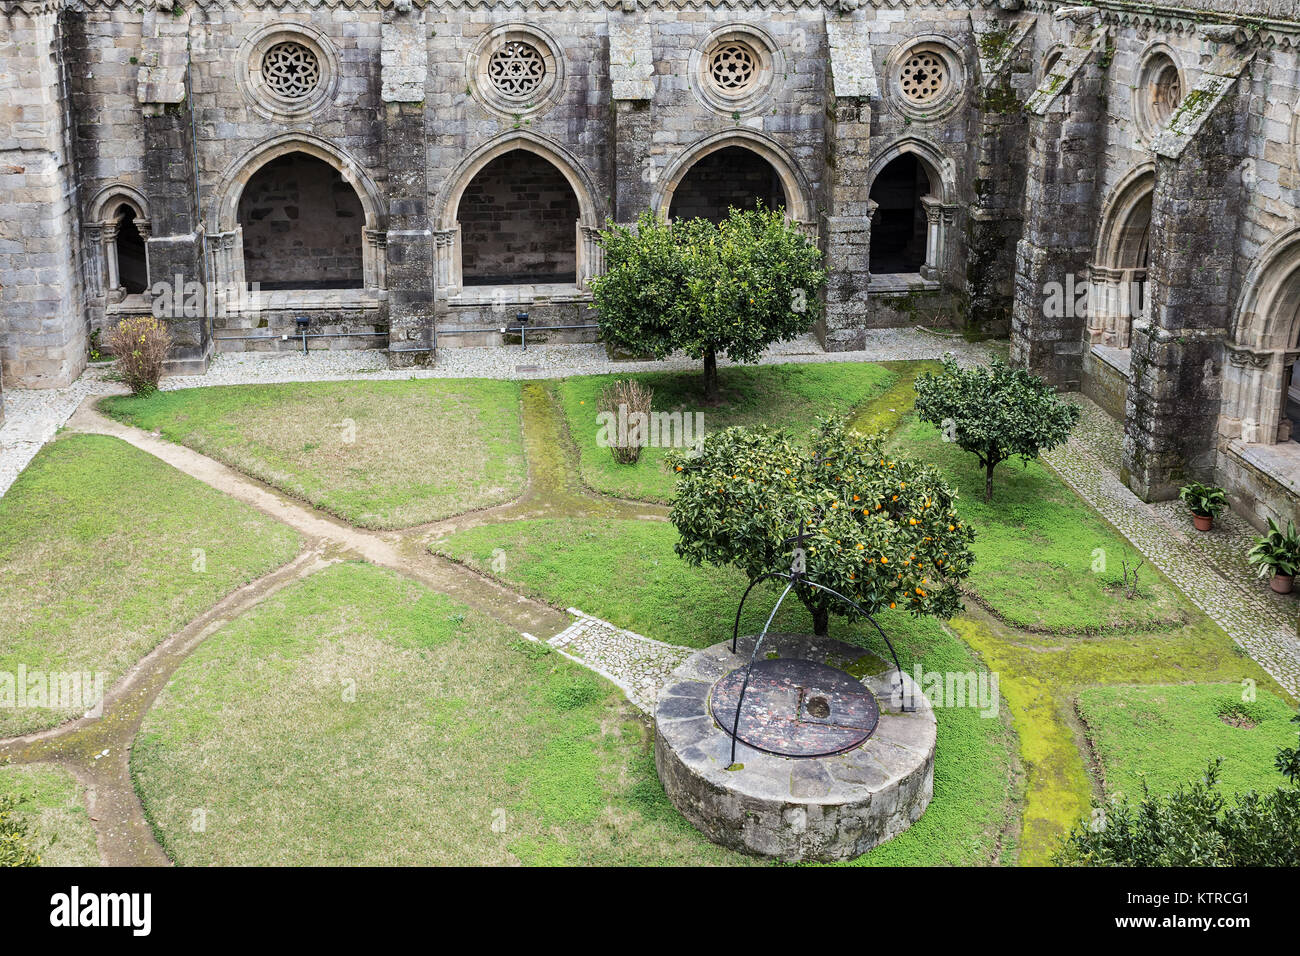 The cloisters of the cathedral of Evora, were built between 1317 and 1340 in Gothic style, and shows the influence of the cloisters of Lisbon Cathedra Stock Photo